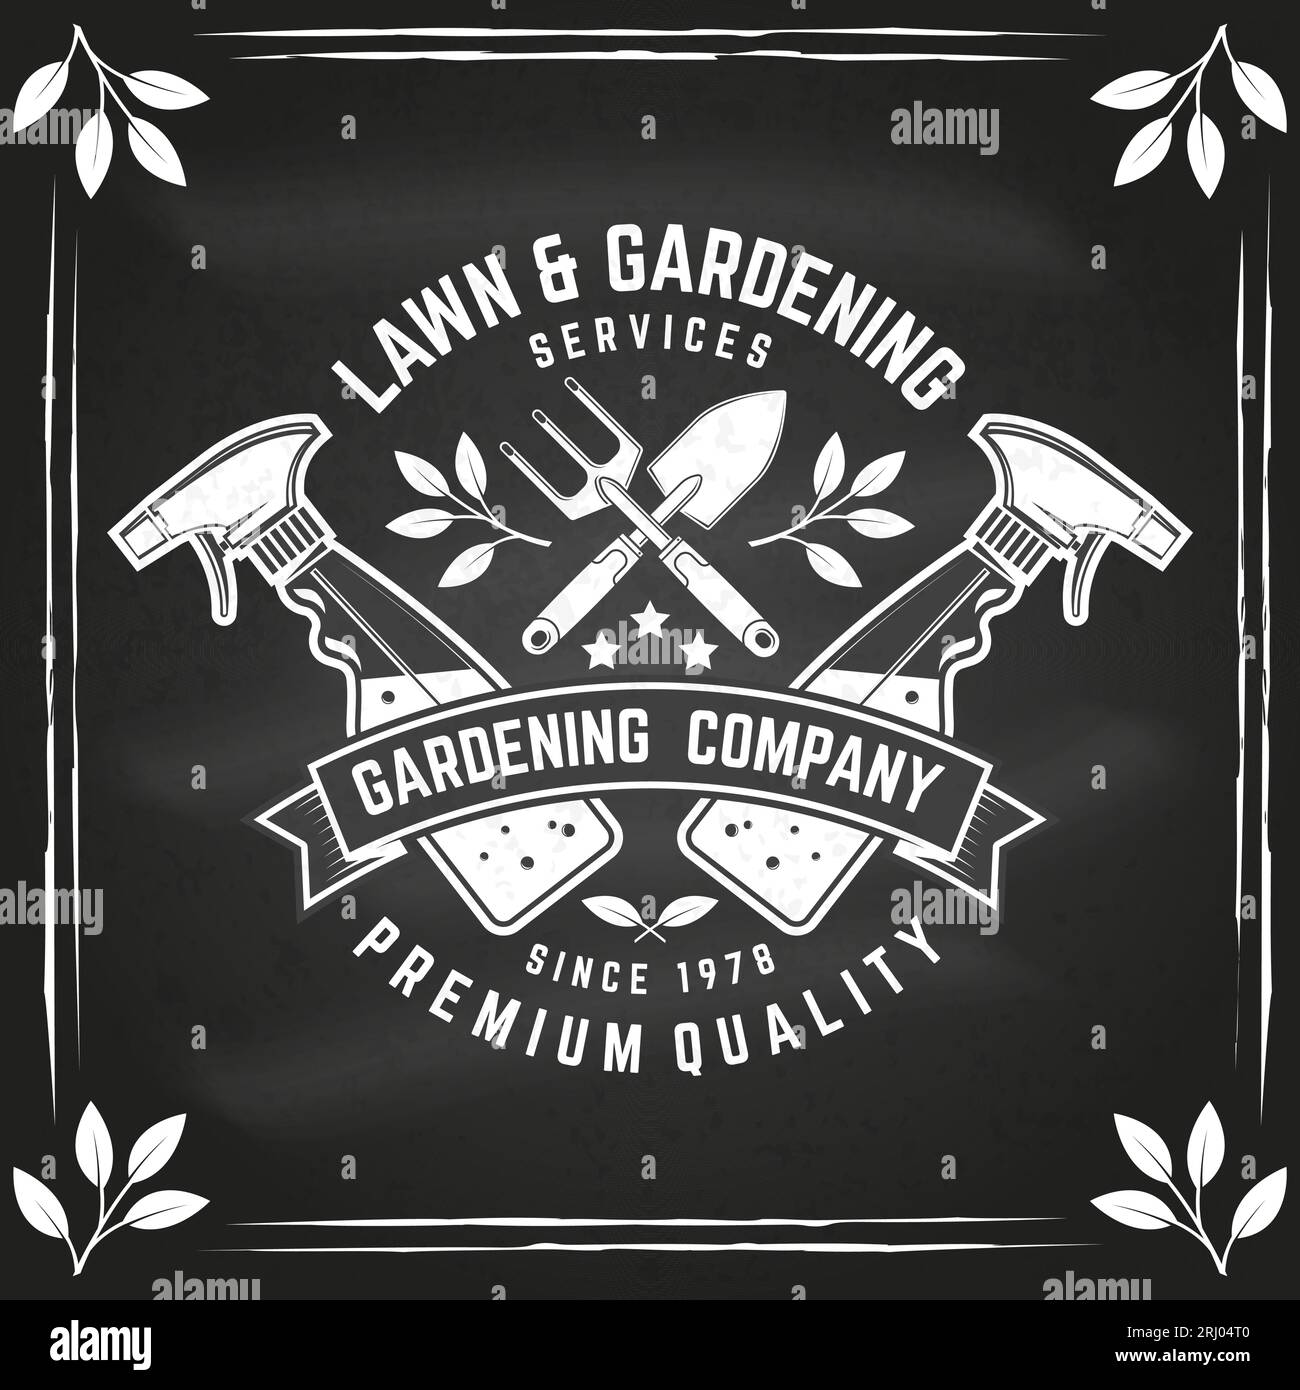 Lawn and Gardening services emblem, label, badge, logo on chalkboard. Vector illustration. For sign, patch, shirt design with hand garden trowel Stock Vector